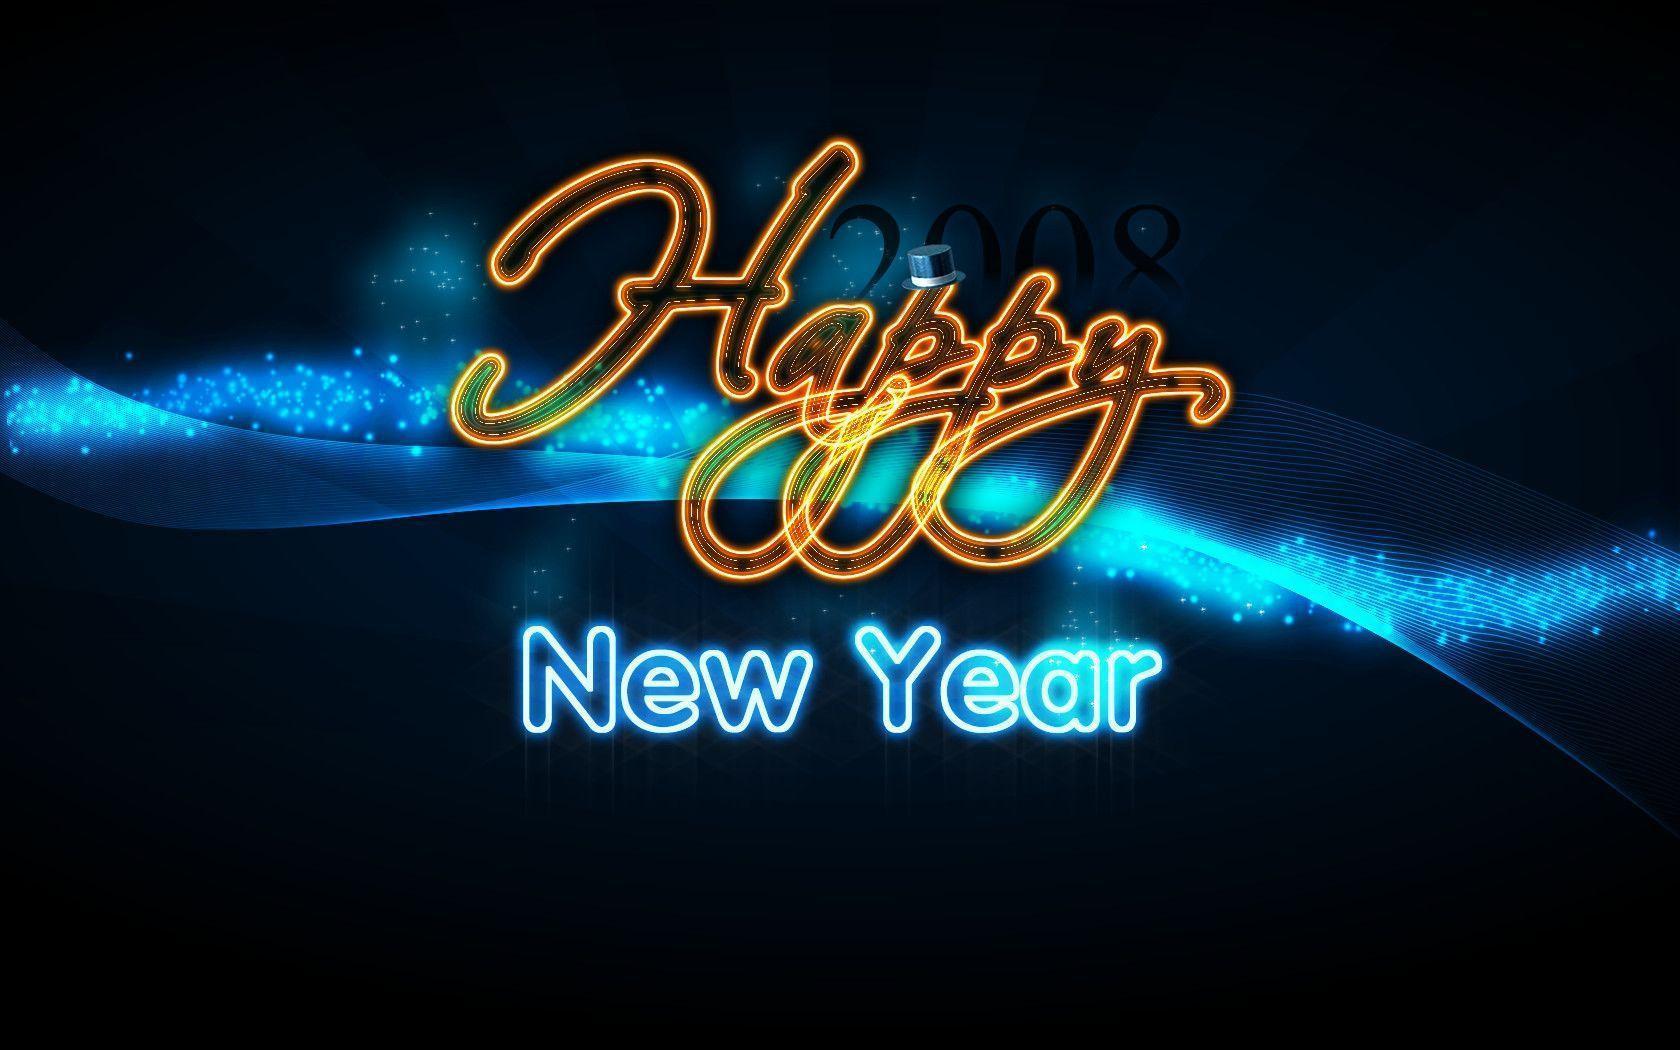 New Year 2012 HD Wallpaper Download Free